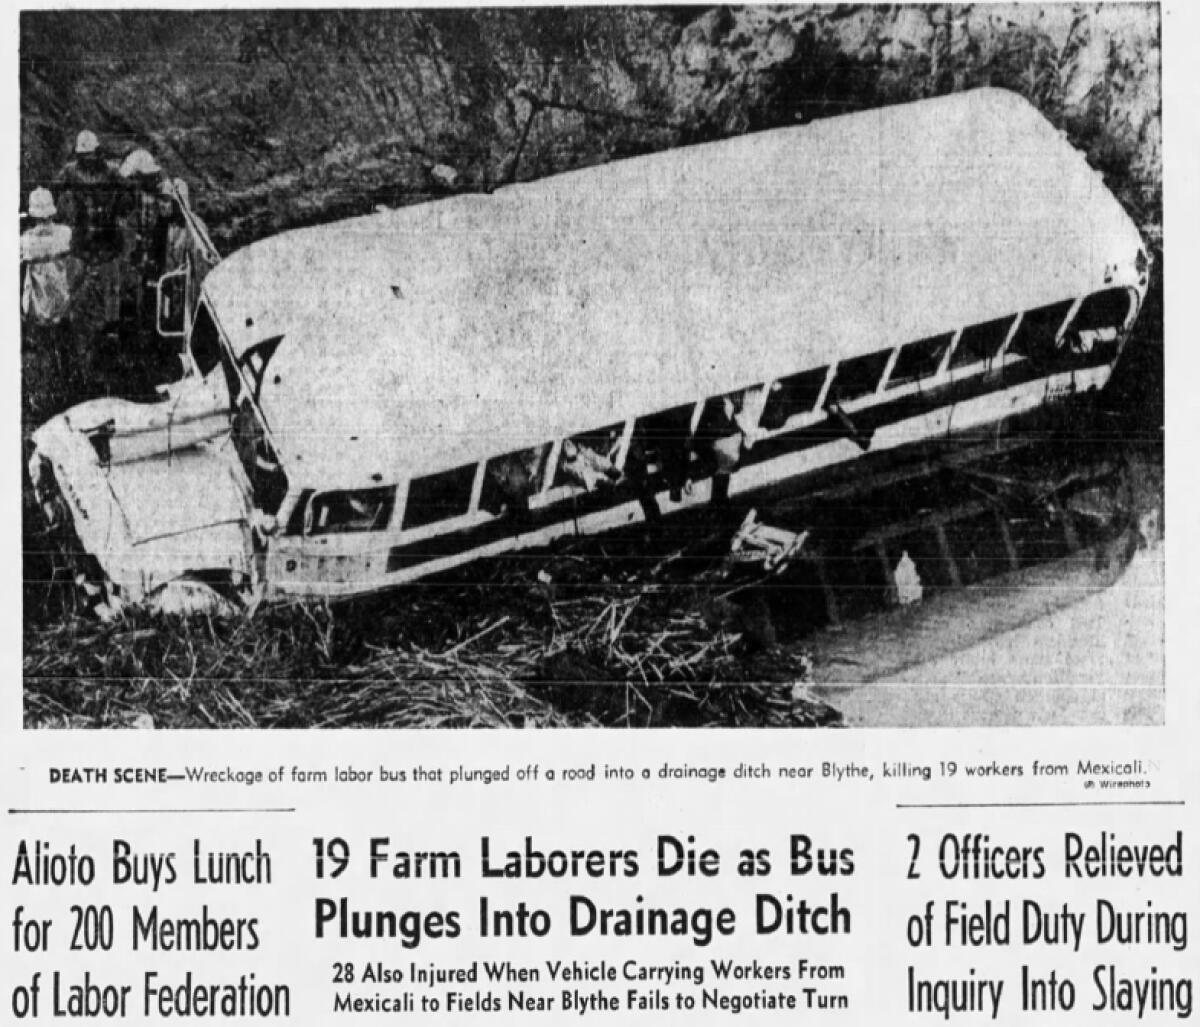 A newspaper clipping with a photo of a crashed bus and accompanying article